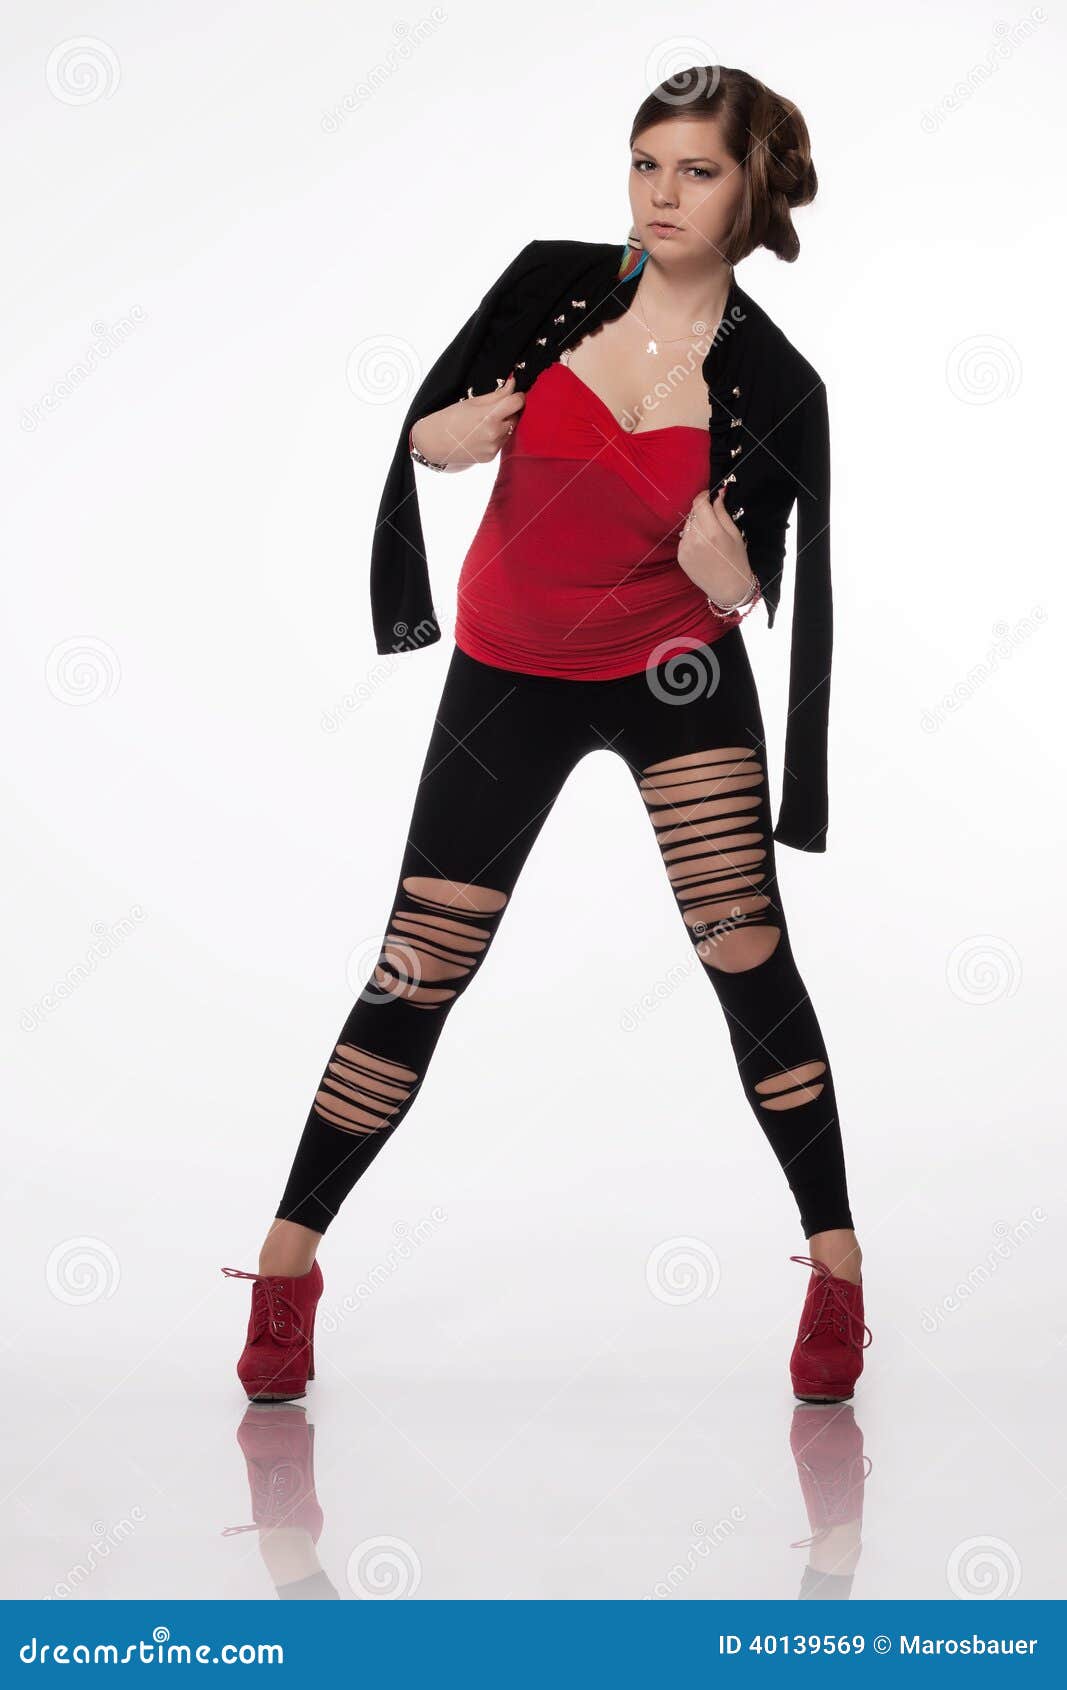 https://thumbs.dreamstime.com/z/young-woman-red-shirt-modern-jacket-leggings-holes-re-high-heels-exceptional-hairstyle-standing-posing-40139569.jpg